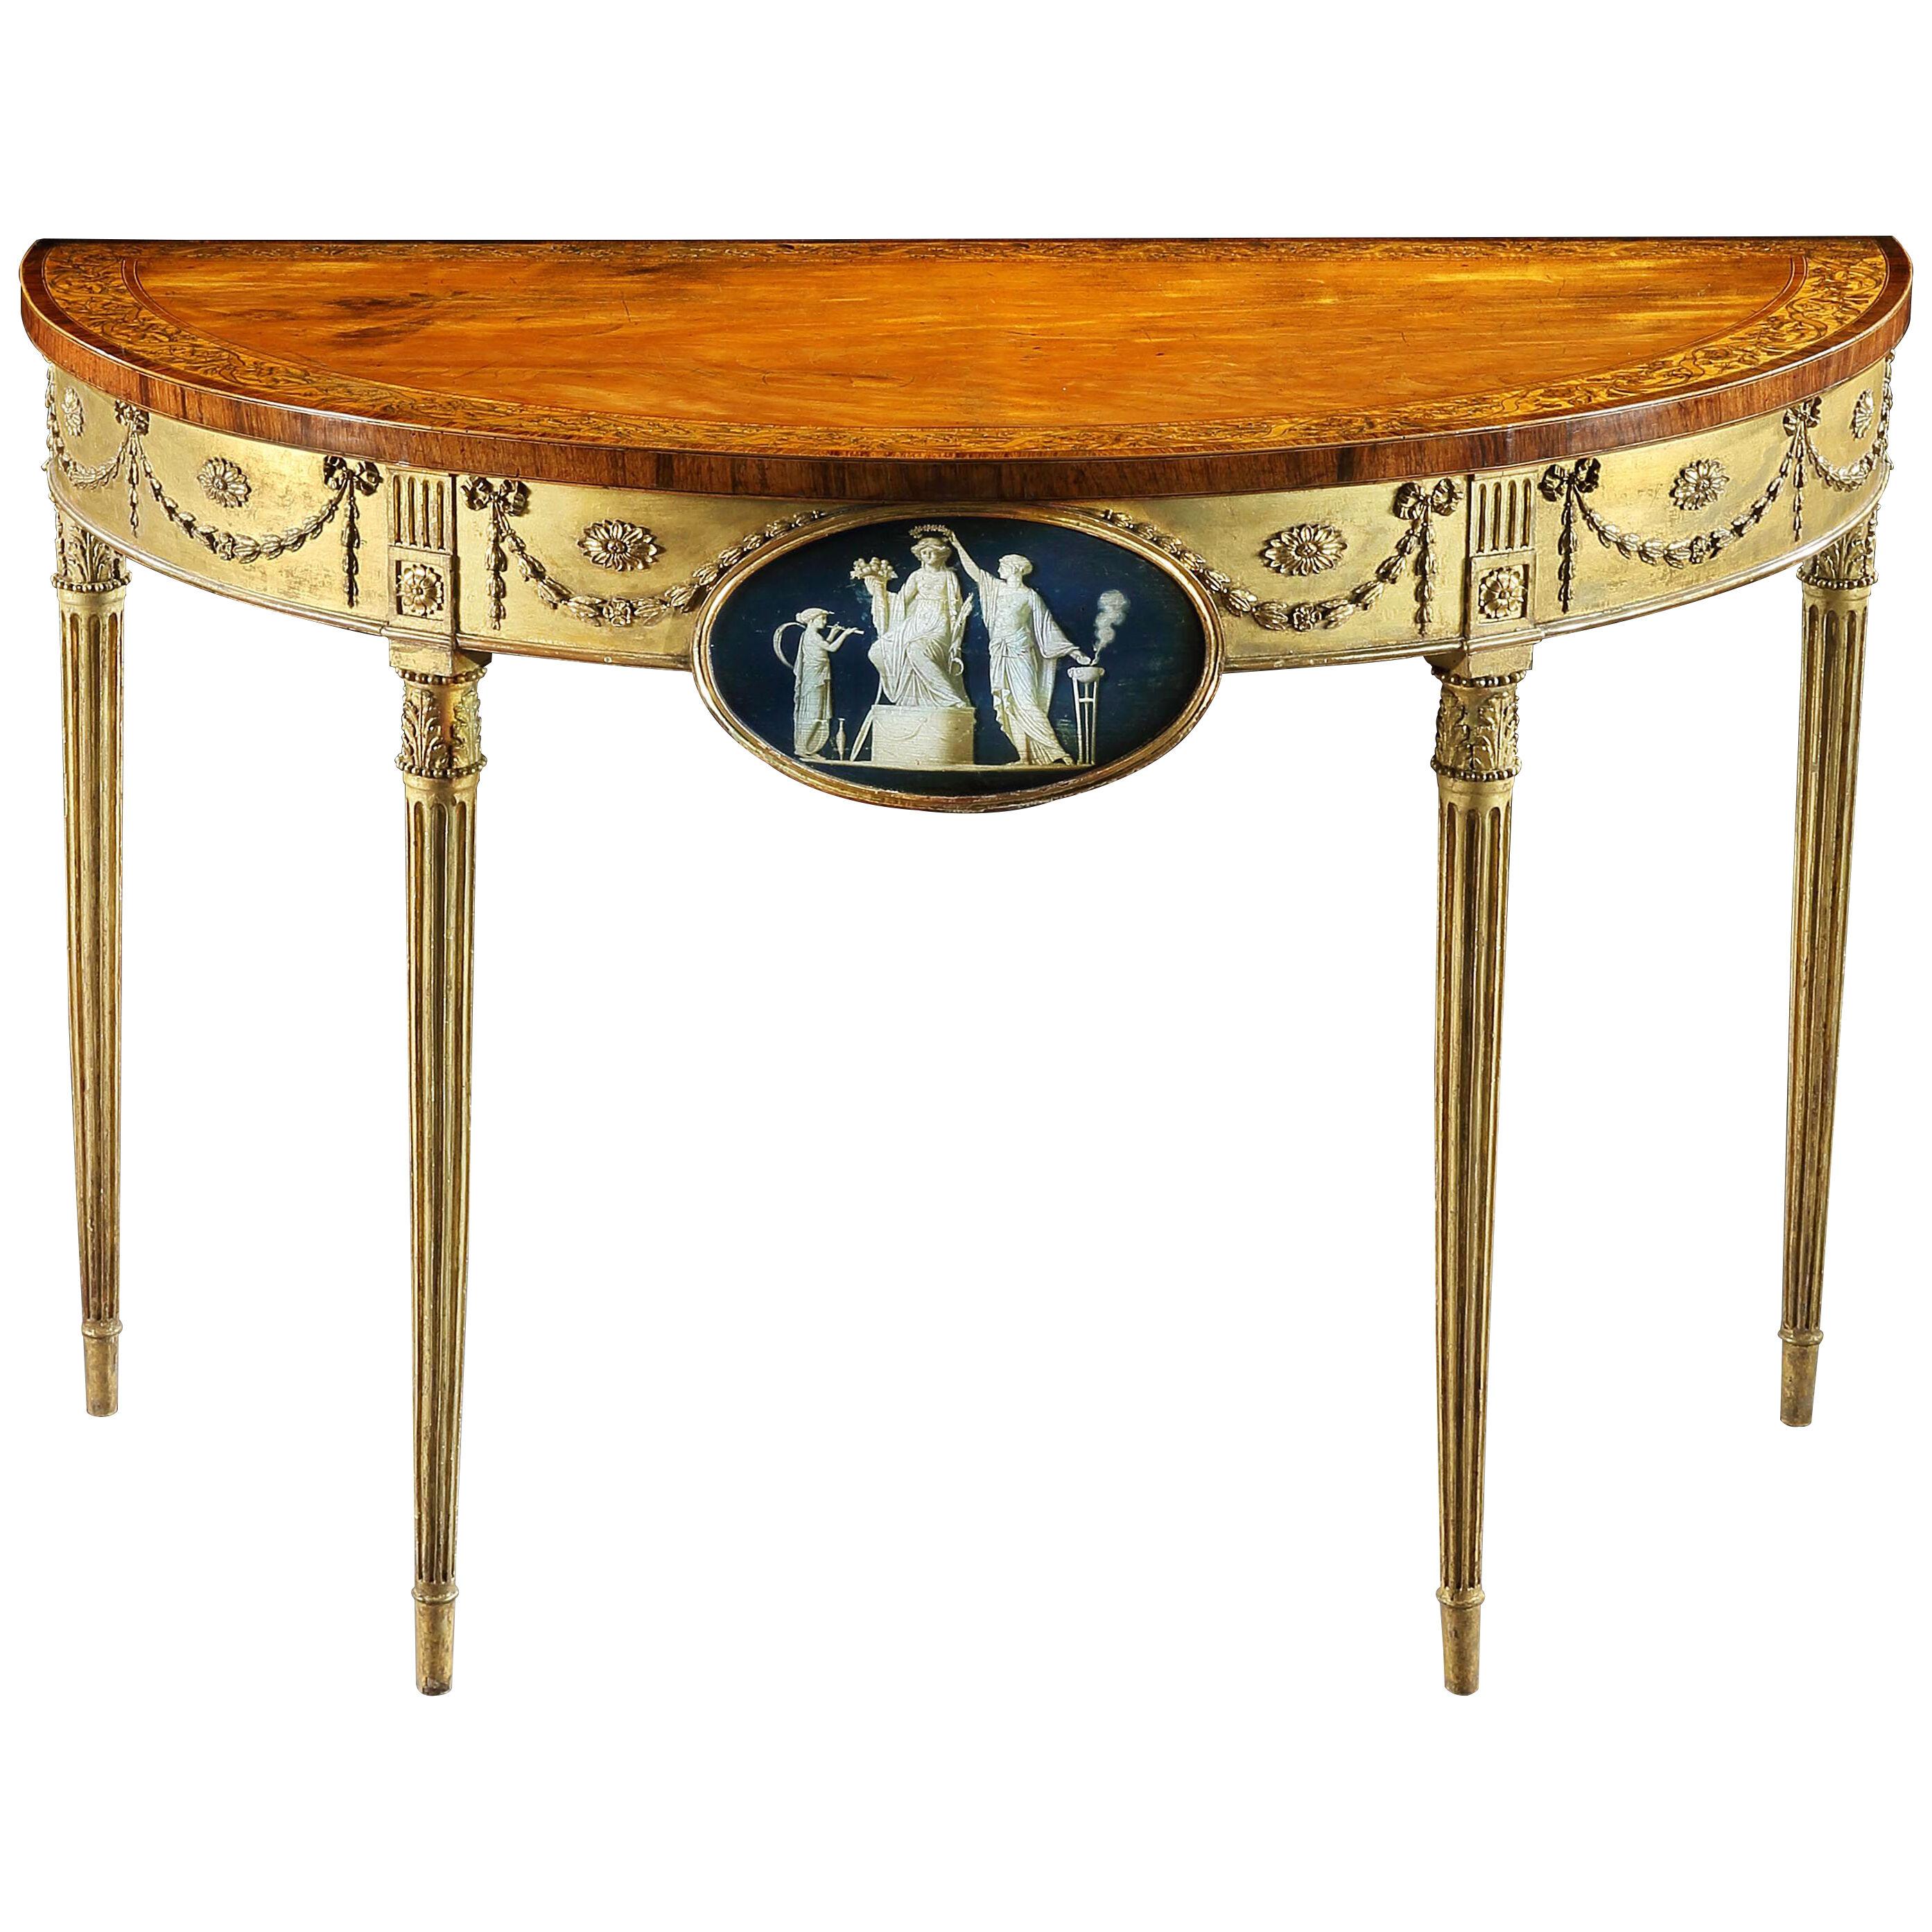 A George III Satinwood Marquetry Giltwood and Composition Demi-Lune Table